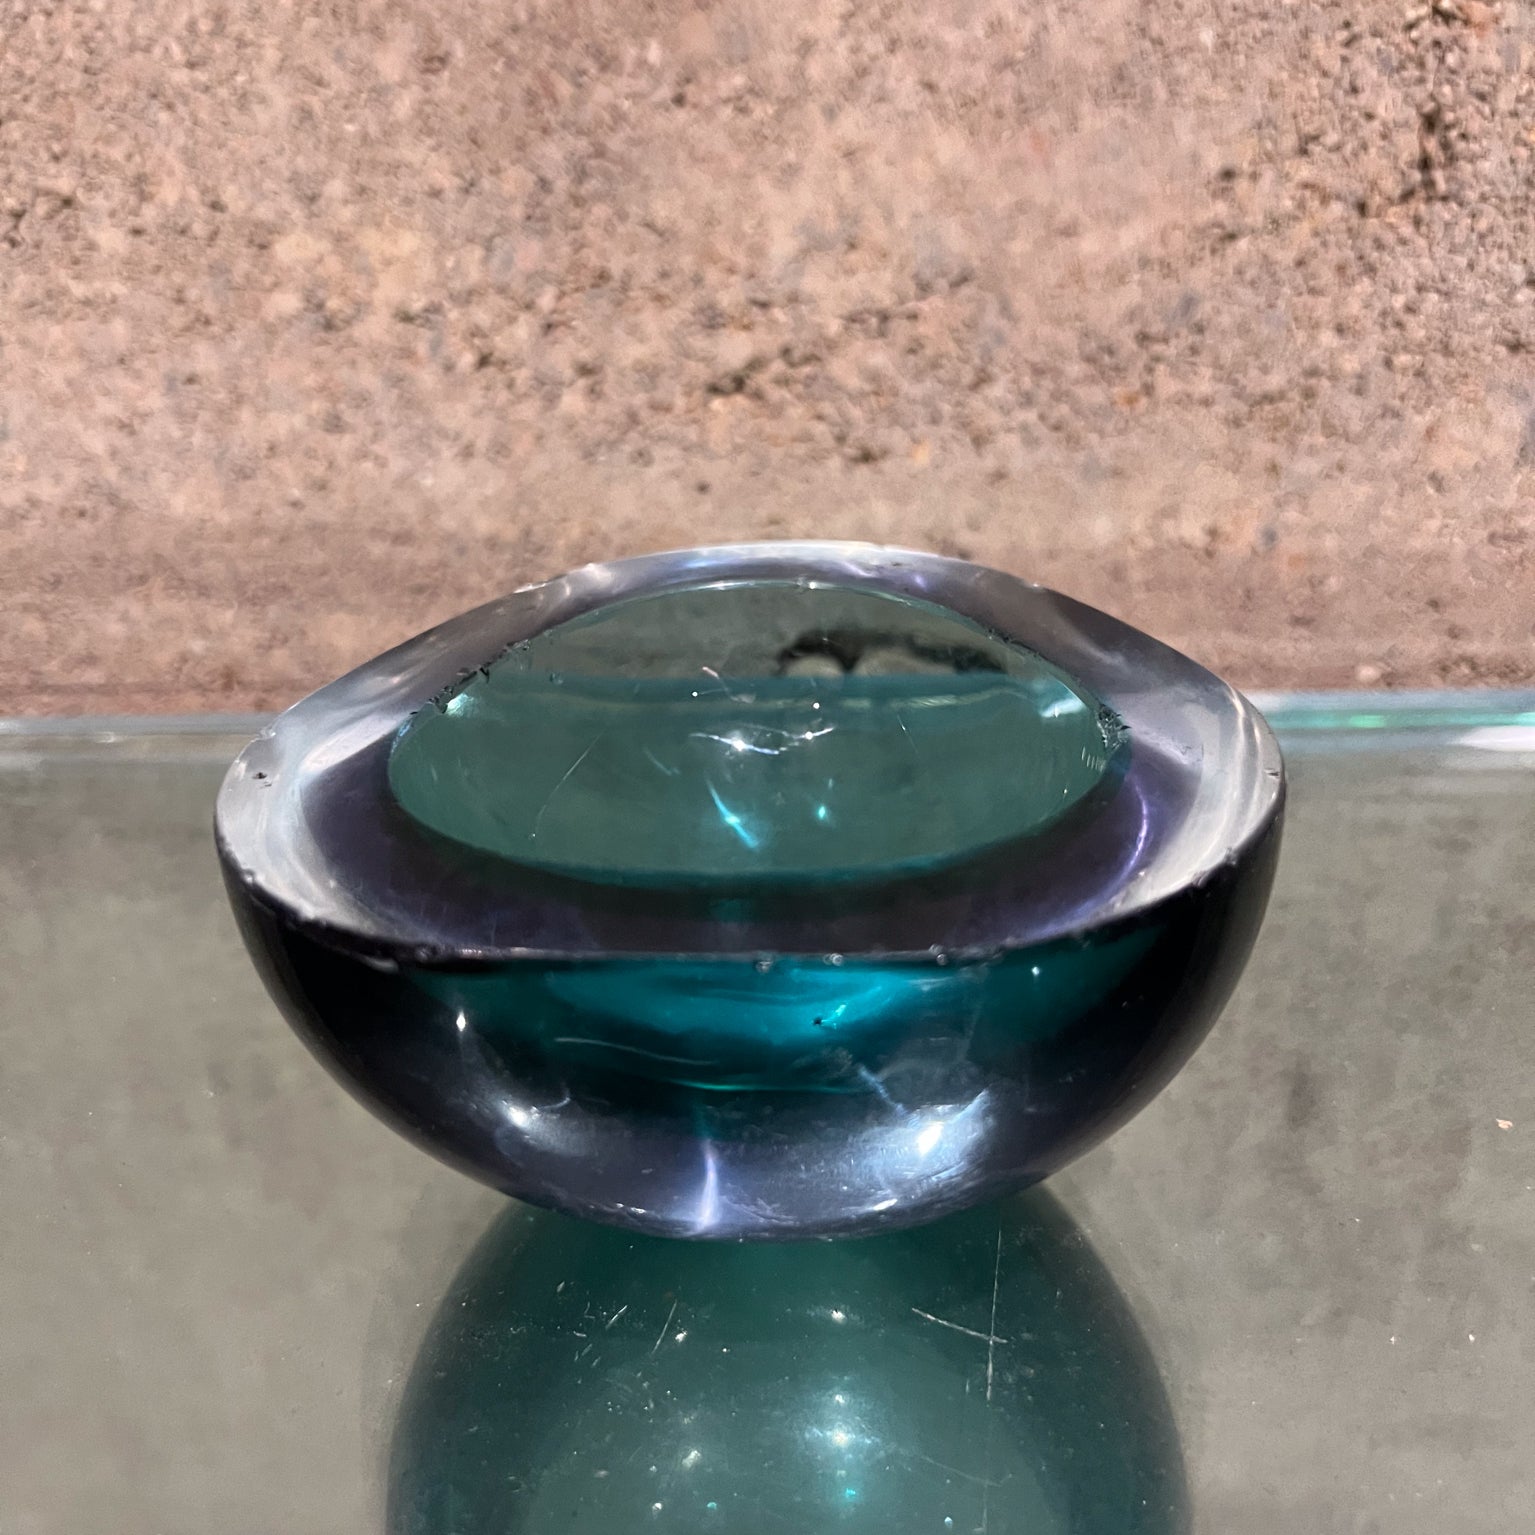 1960s Italian Murano Green Art Glass Geode Triangular Bowl
4 x 4 x 1.75
Unmarked
Preowned original vintage unrestored
Refer to all images.